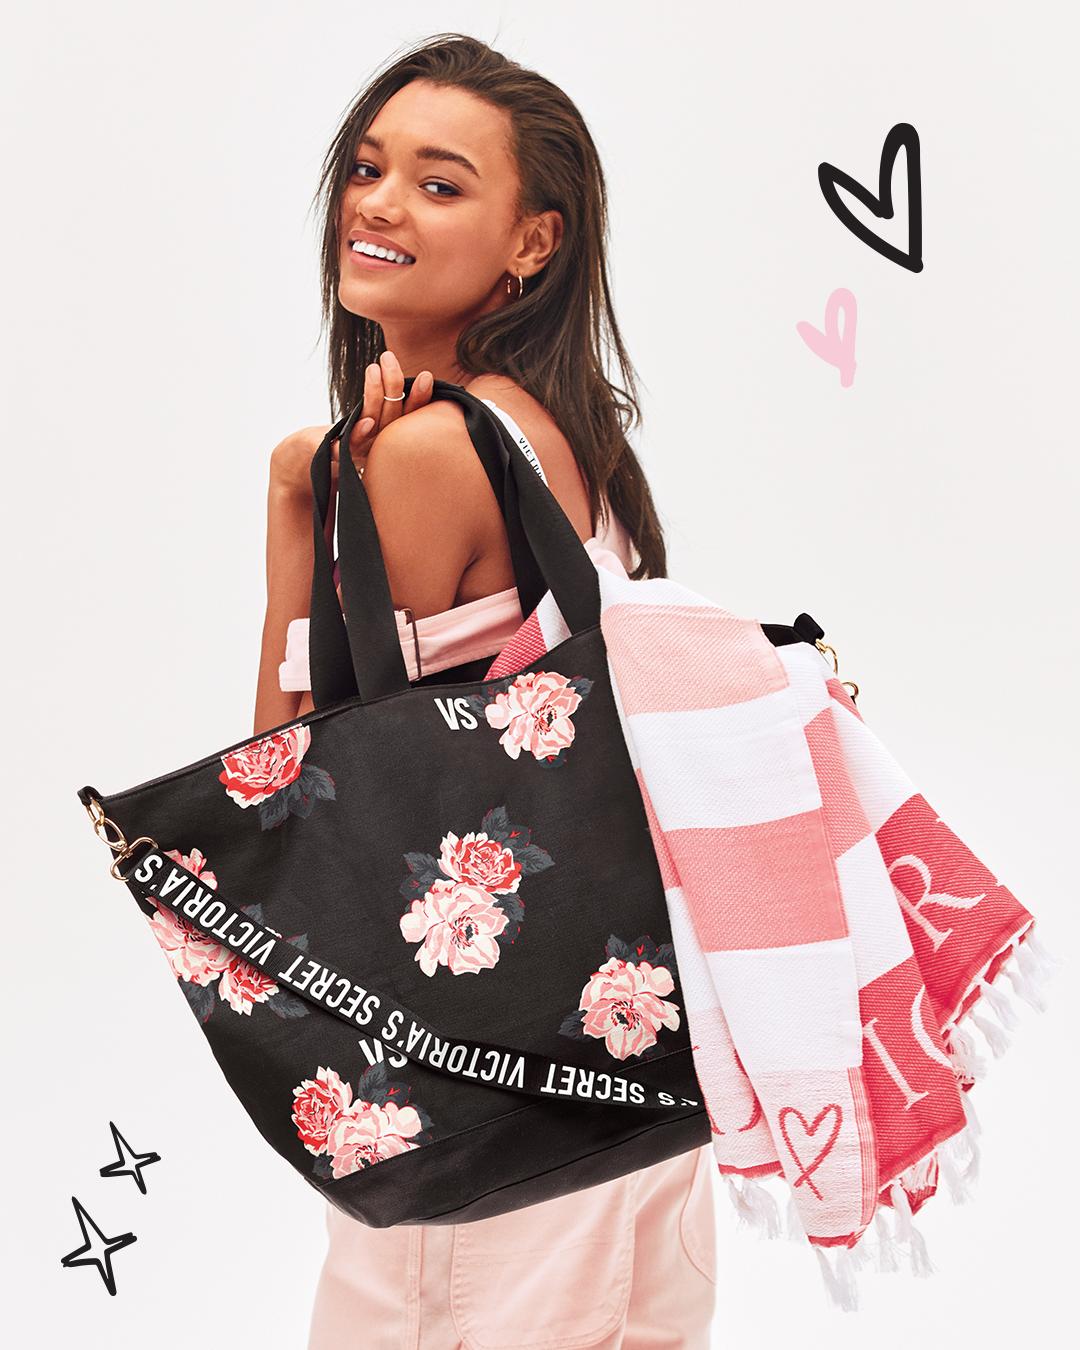 Victoria's Secret on X: Get away with a FREE weekender when you spend $75  OR spend $125 & score a FREE blanket too! Excl. apply. Ends 7.29.  🇺🇸🇨🇦 only.   /